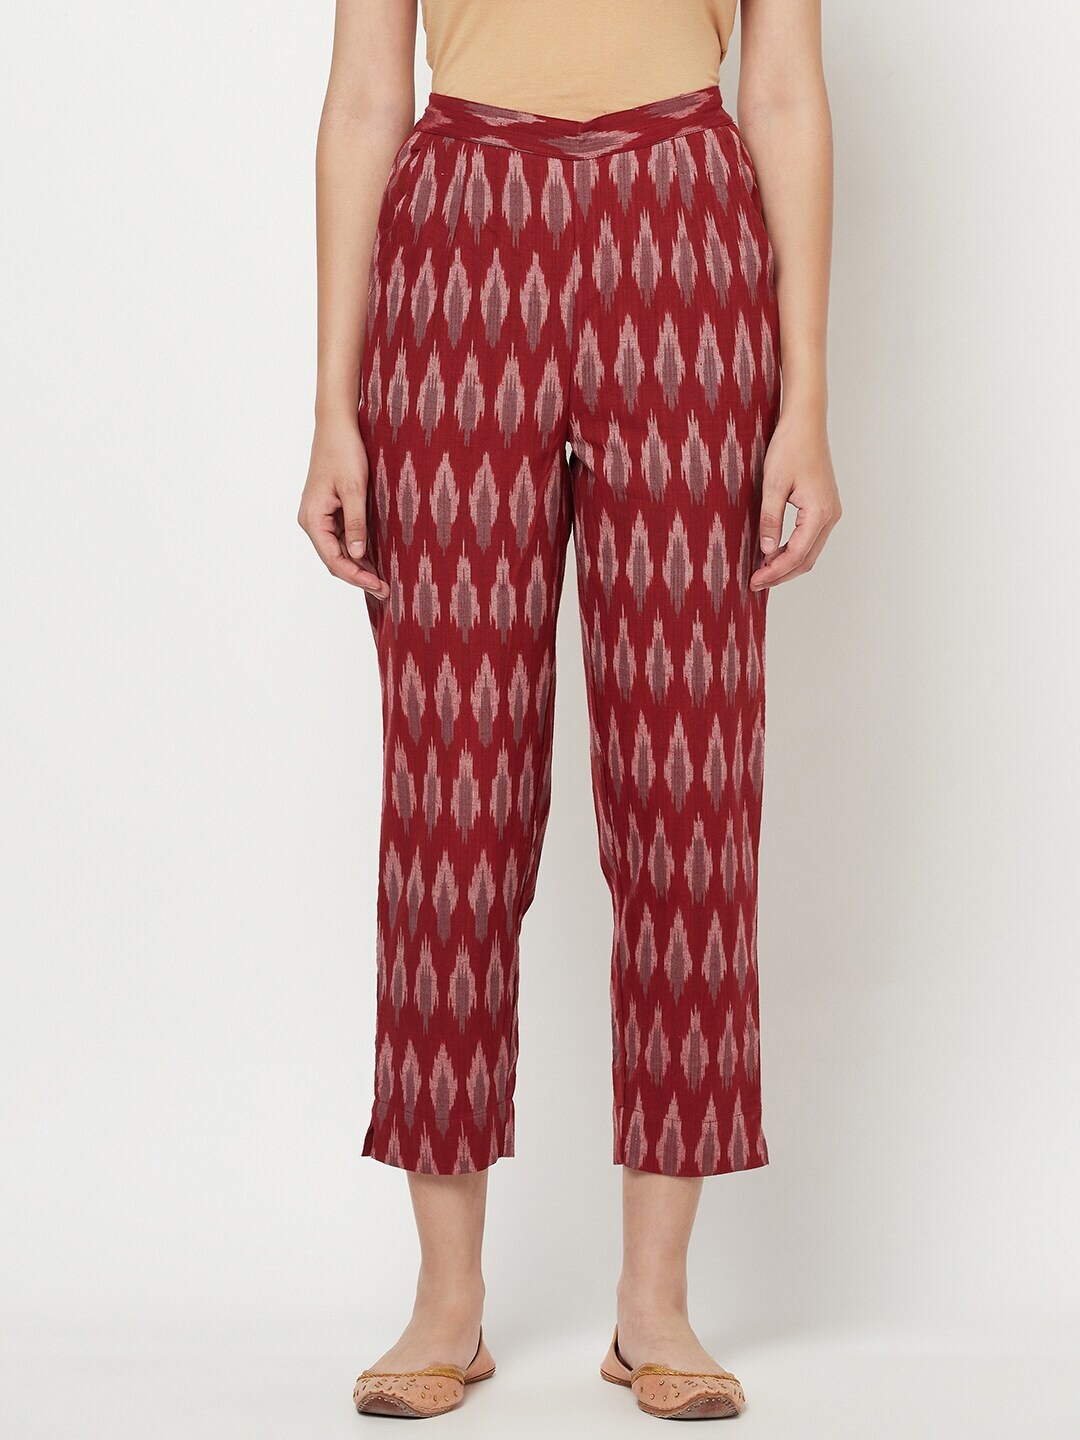 Fabindia Women Maroon Ikat Printed Tapered Fit Cotton Cigerette Trousers Price in India